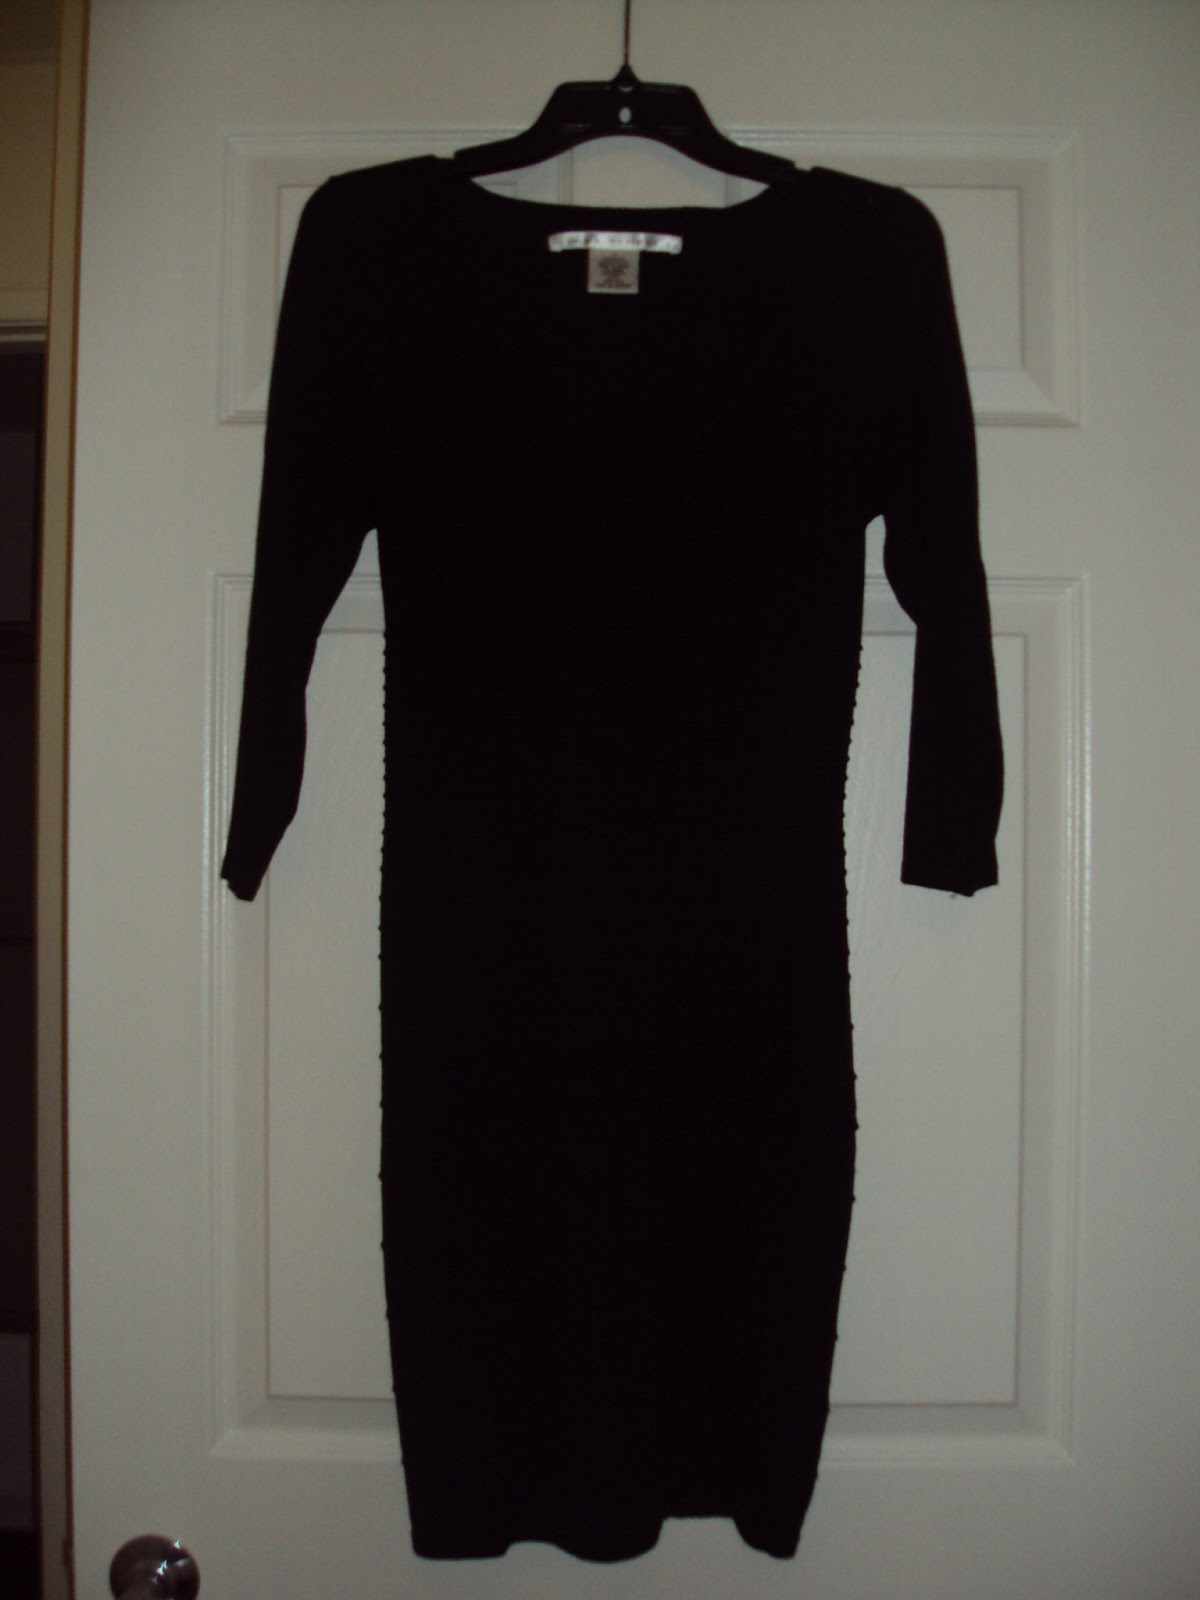 The Vintage Project: This Charming Dame Lesson 2 - Own a Little Black Dress